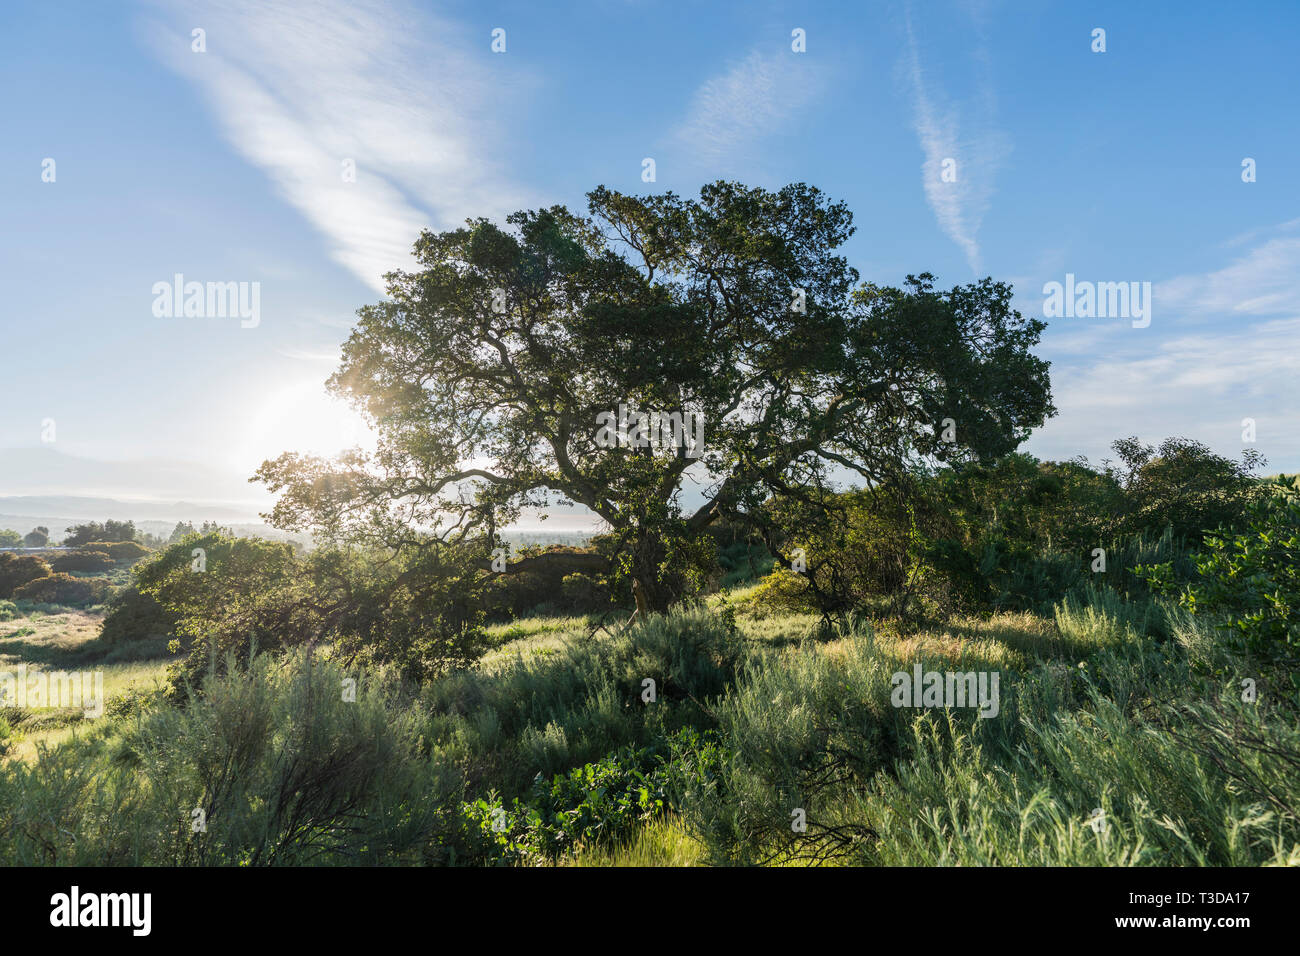 Early morning view of native California oak tree on hillside at Santa Susana Pass State Historic Park in the San Fernando Valley area of Los Angeles. Stock Photo